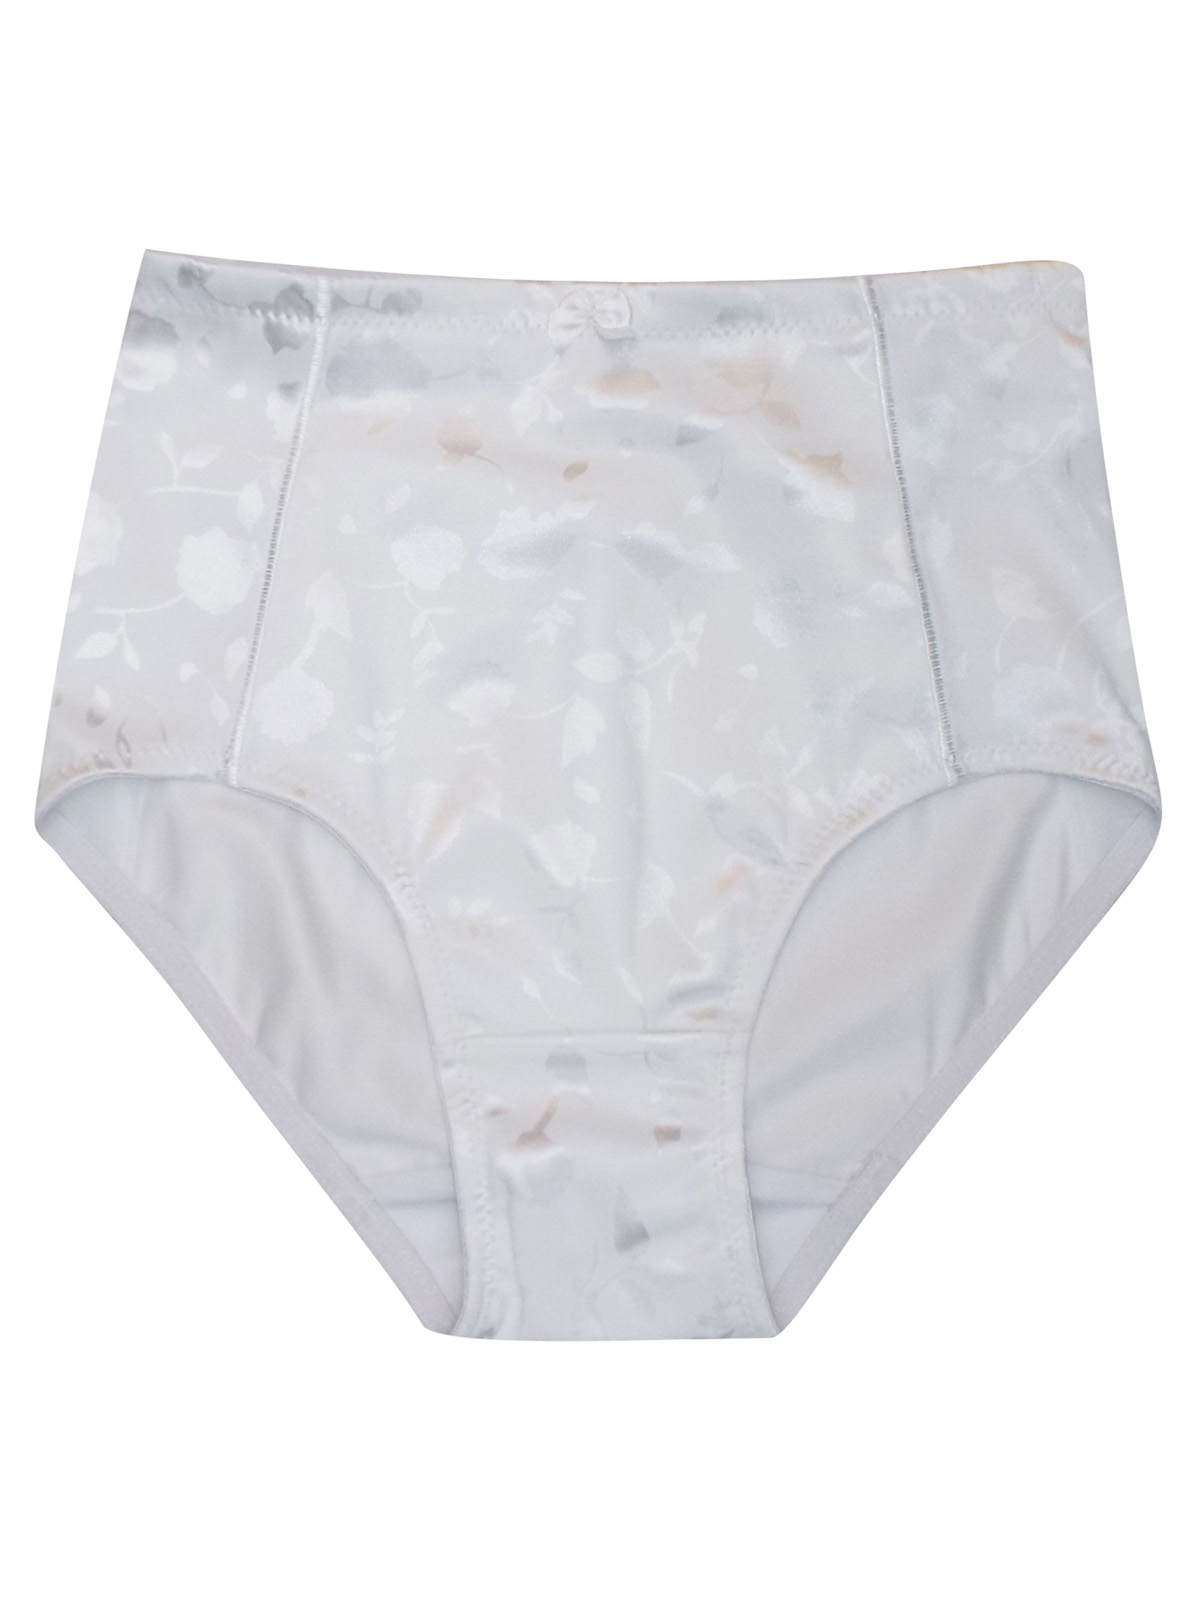 Trofe - - Trofé WHITE Jacquard Control Shaping Full Briefs - Size 10 to 20